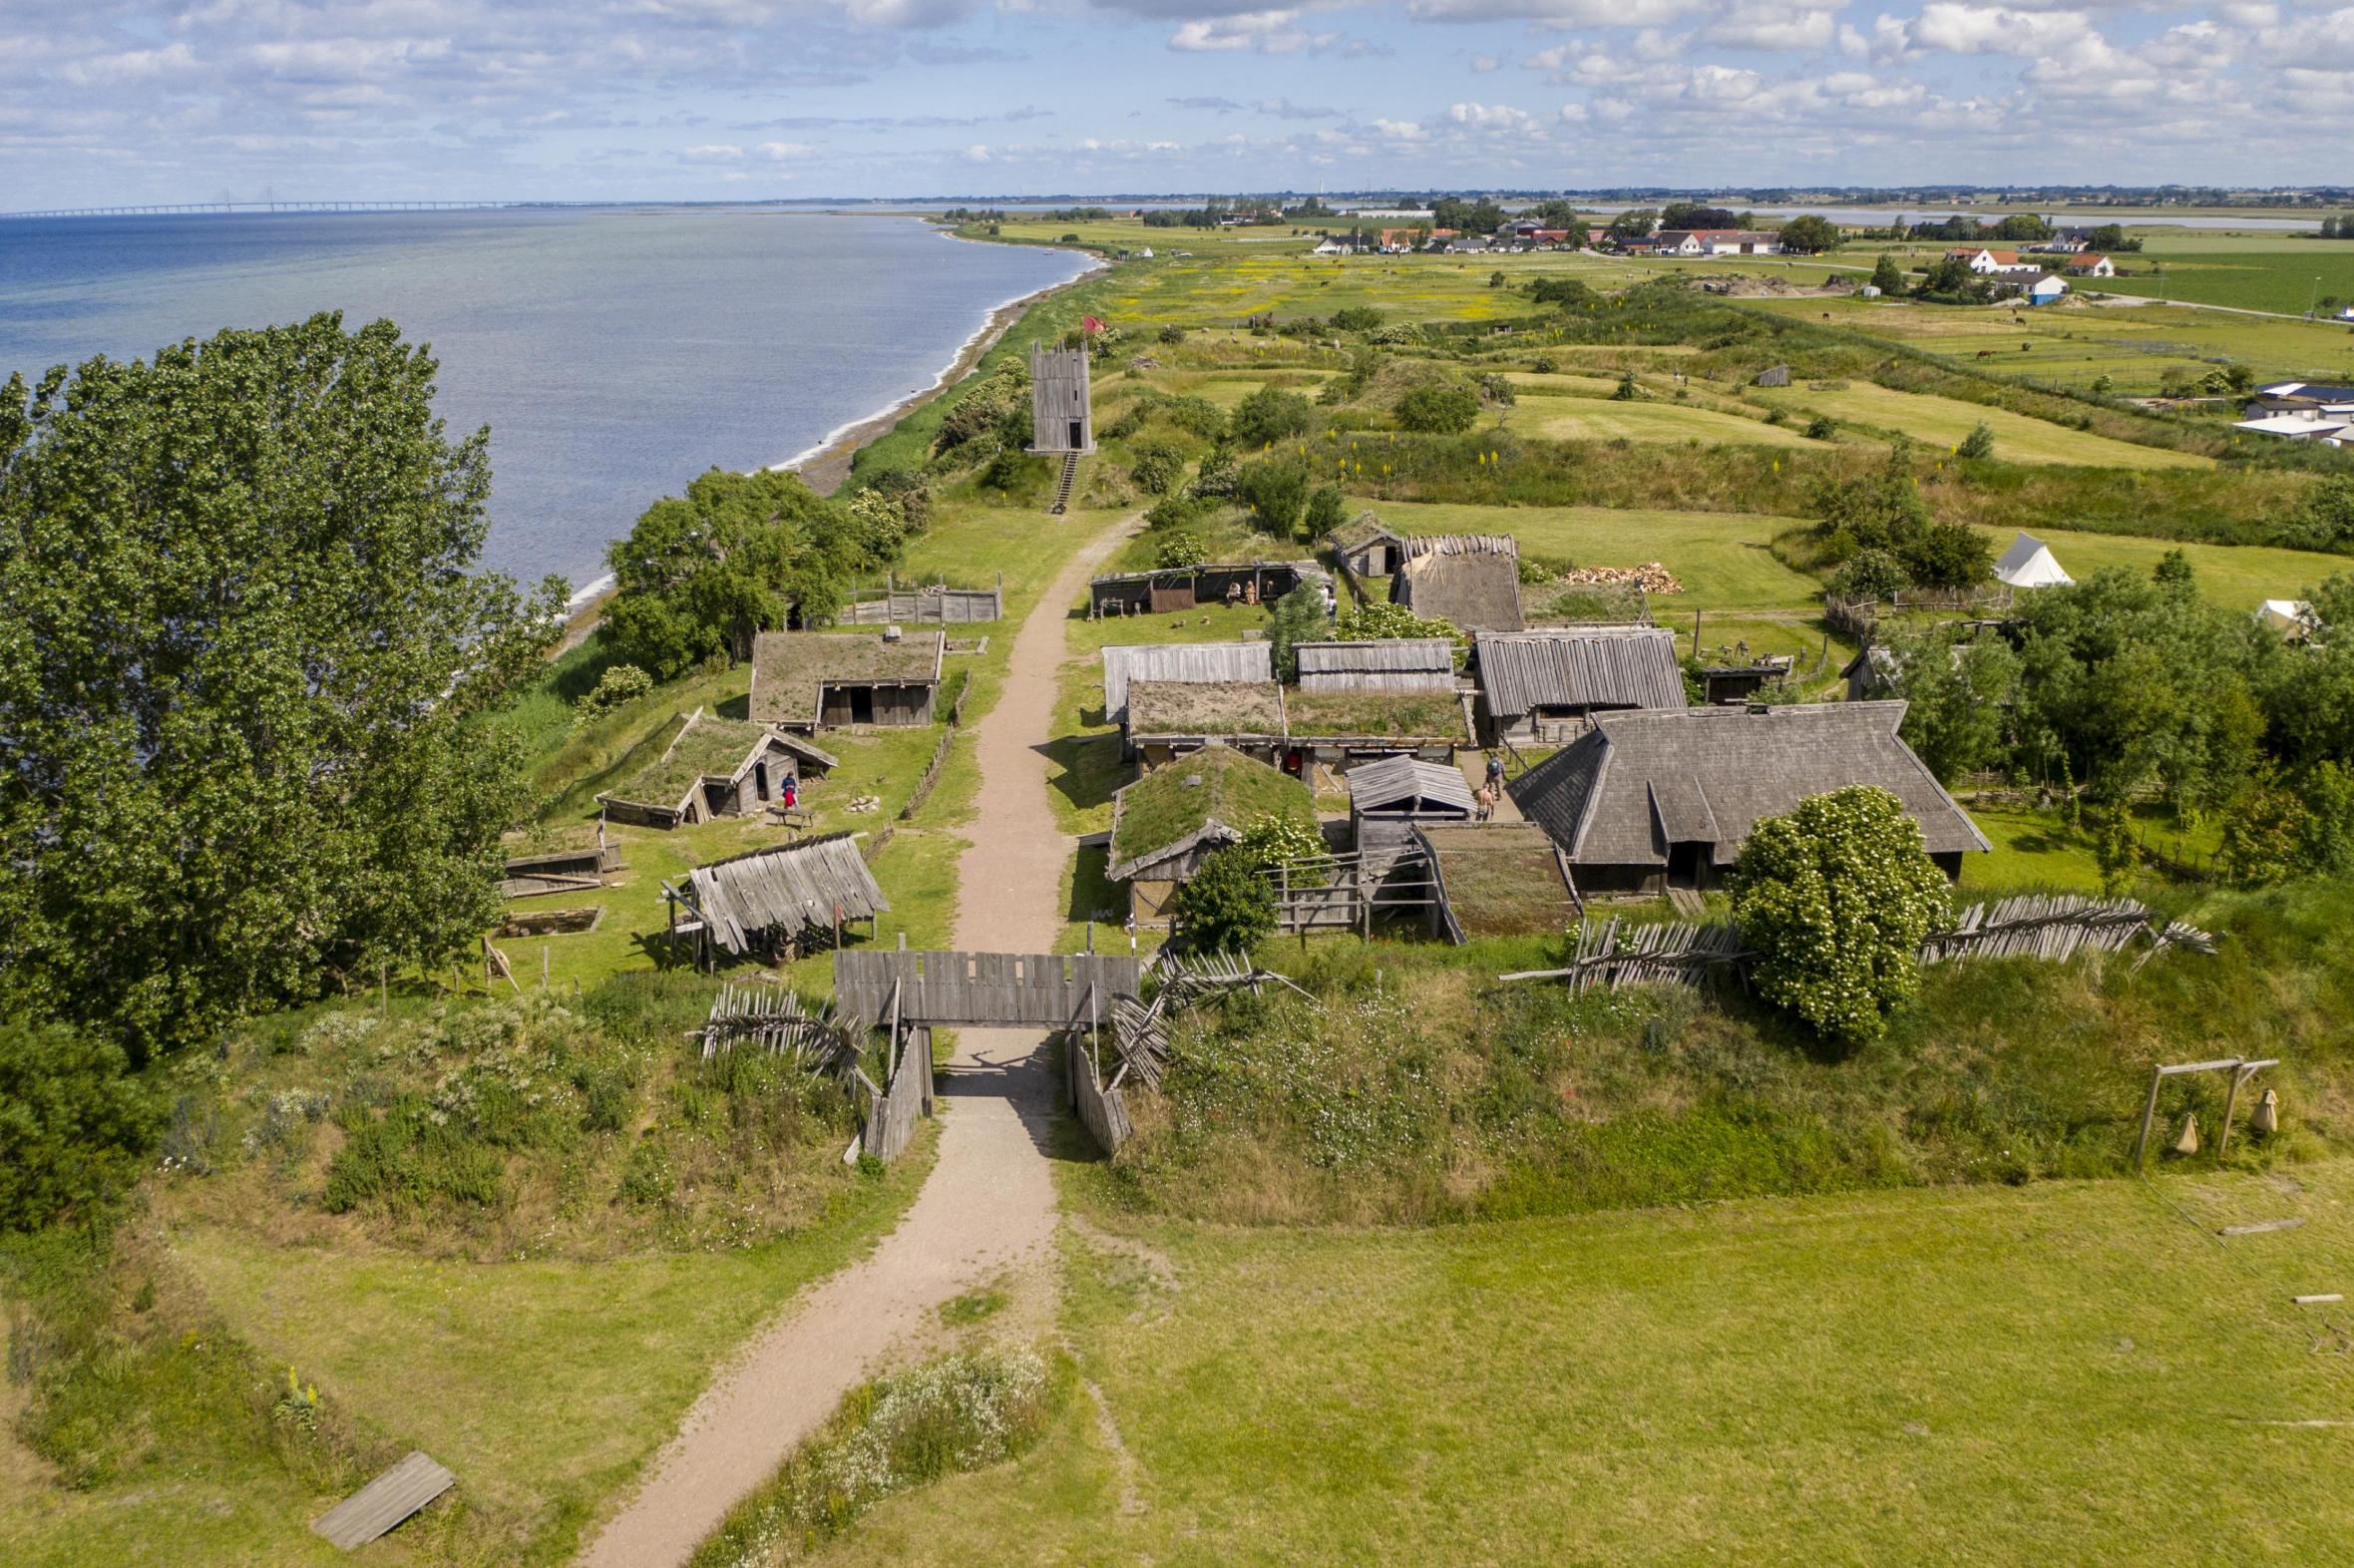 Foteviken viking village with green fields and sea in the background